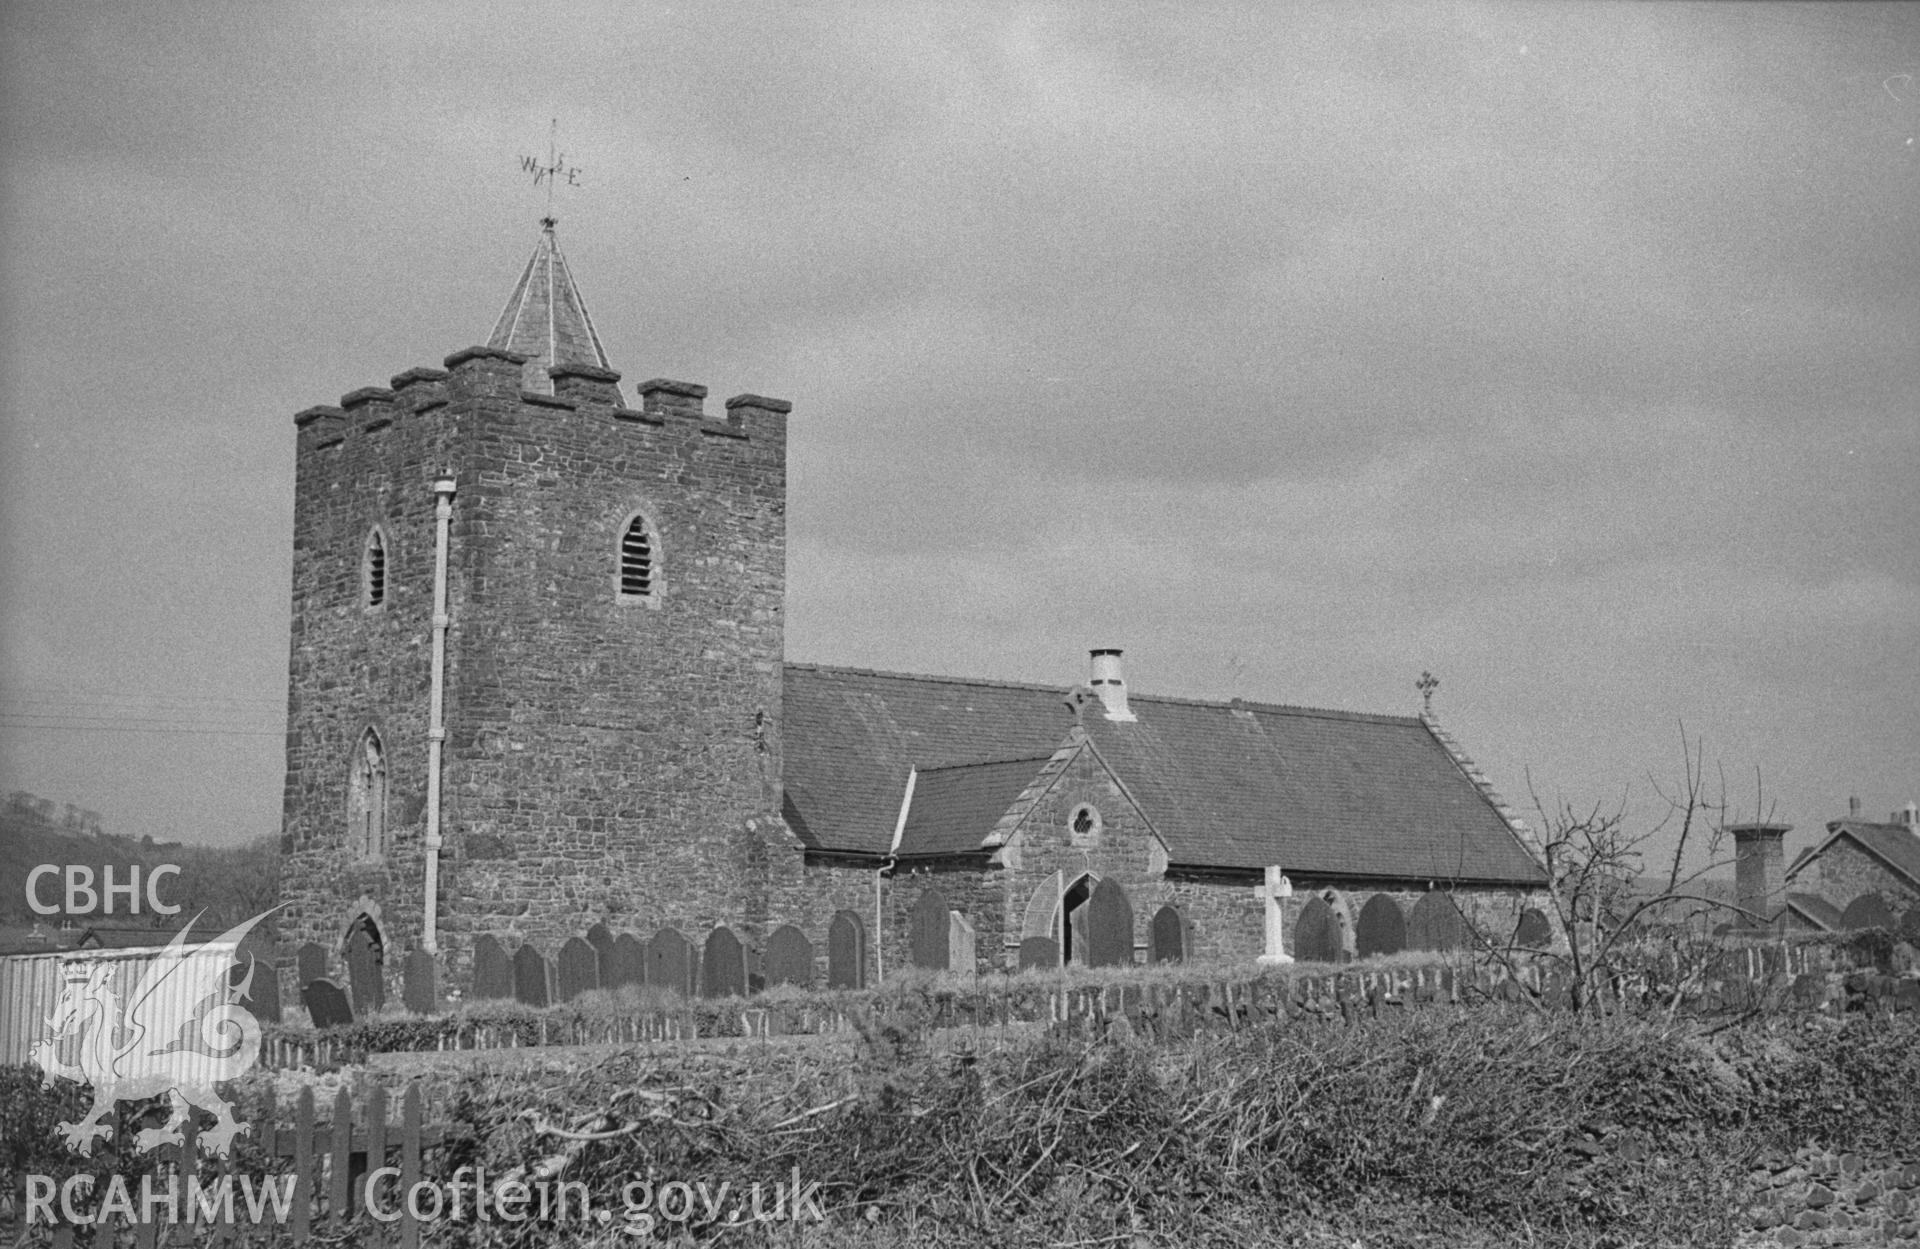 Black and White photograph showing St Hilarys church, Llanilar, from the main road. Photographed by Arthur Chater in April 1962 from Grid Reference SN 623 751, looking north east.